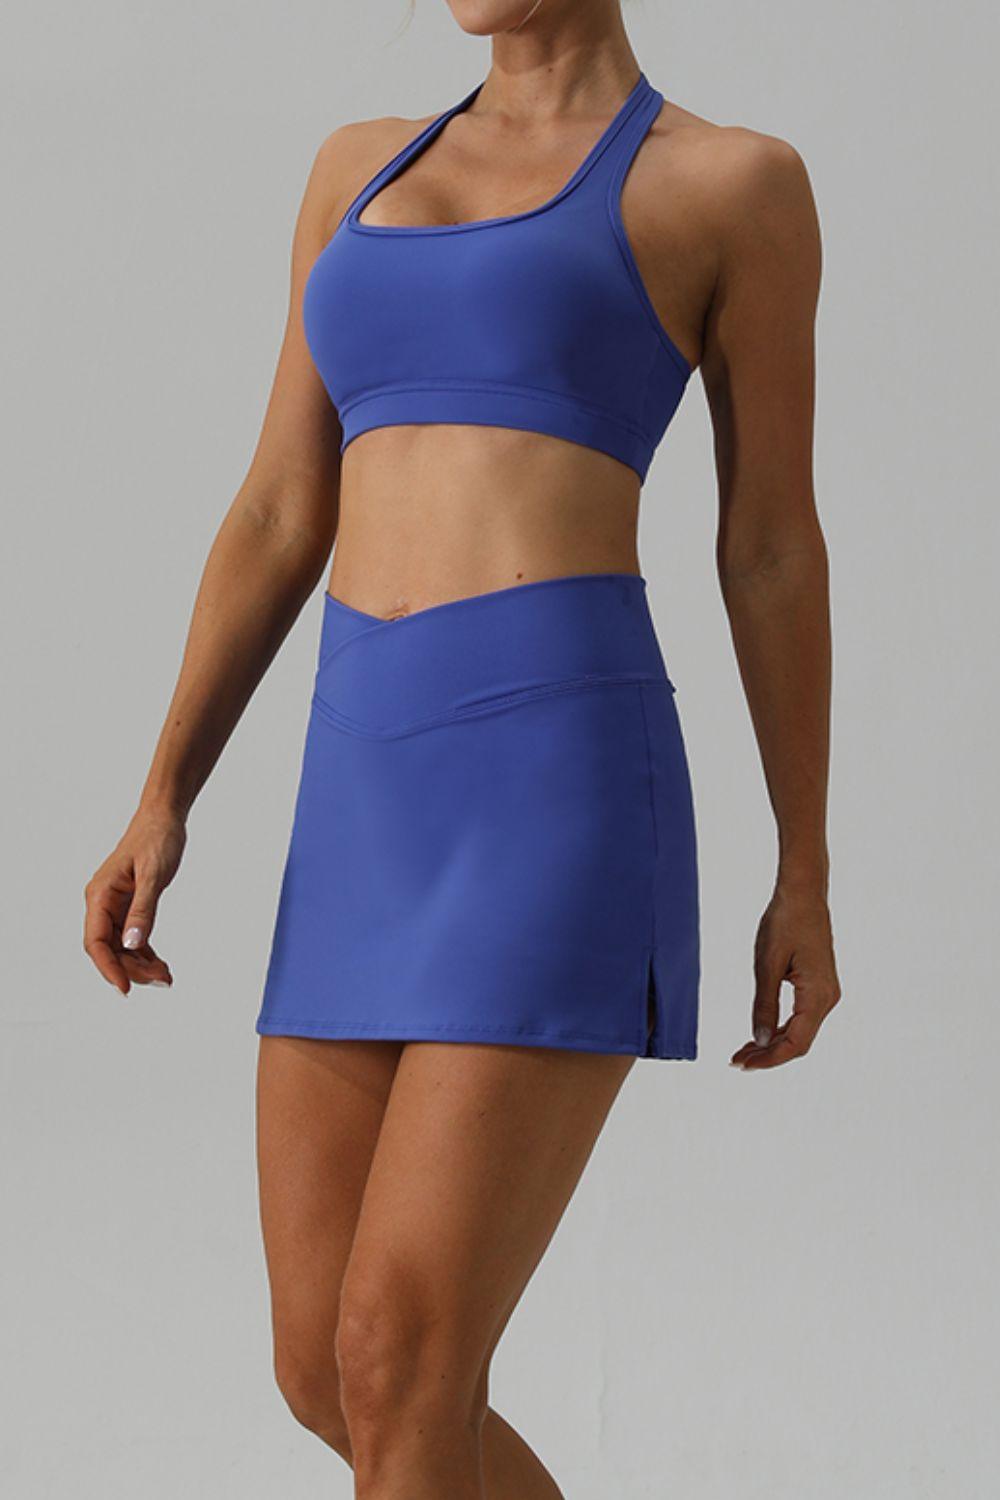 a woman in a blue sports bra top and skirt